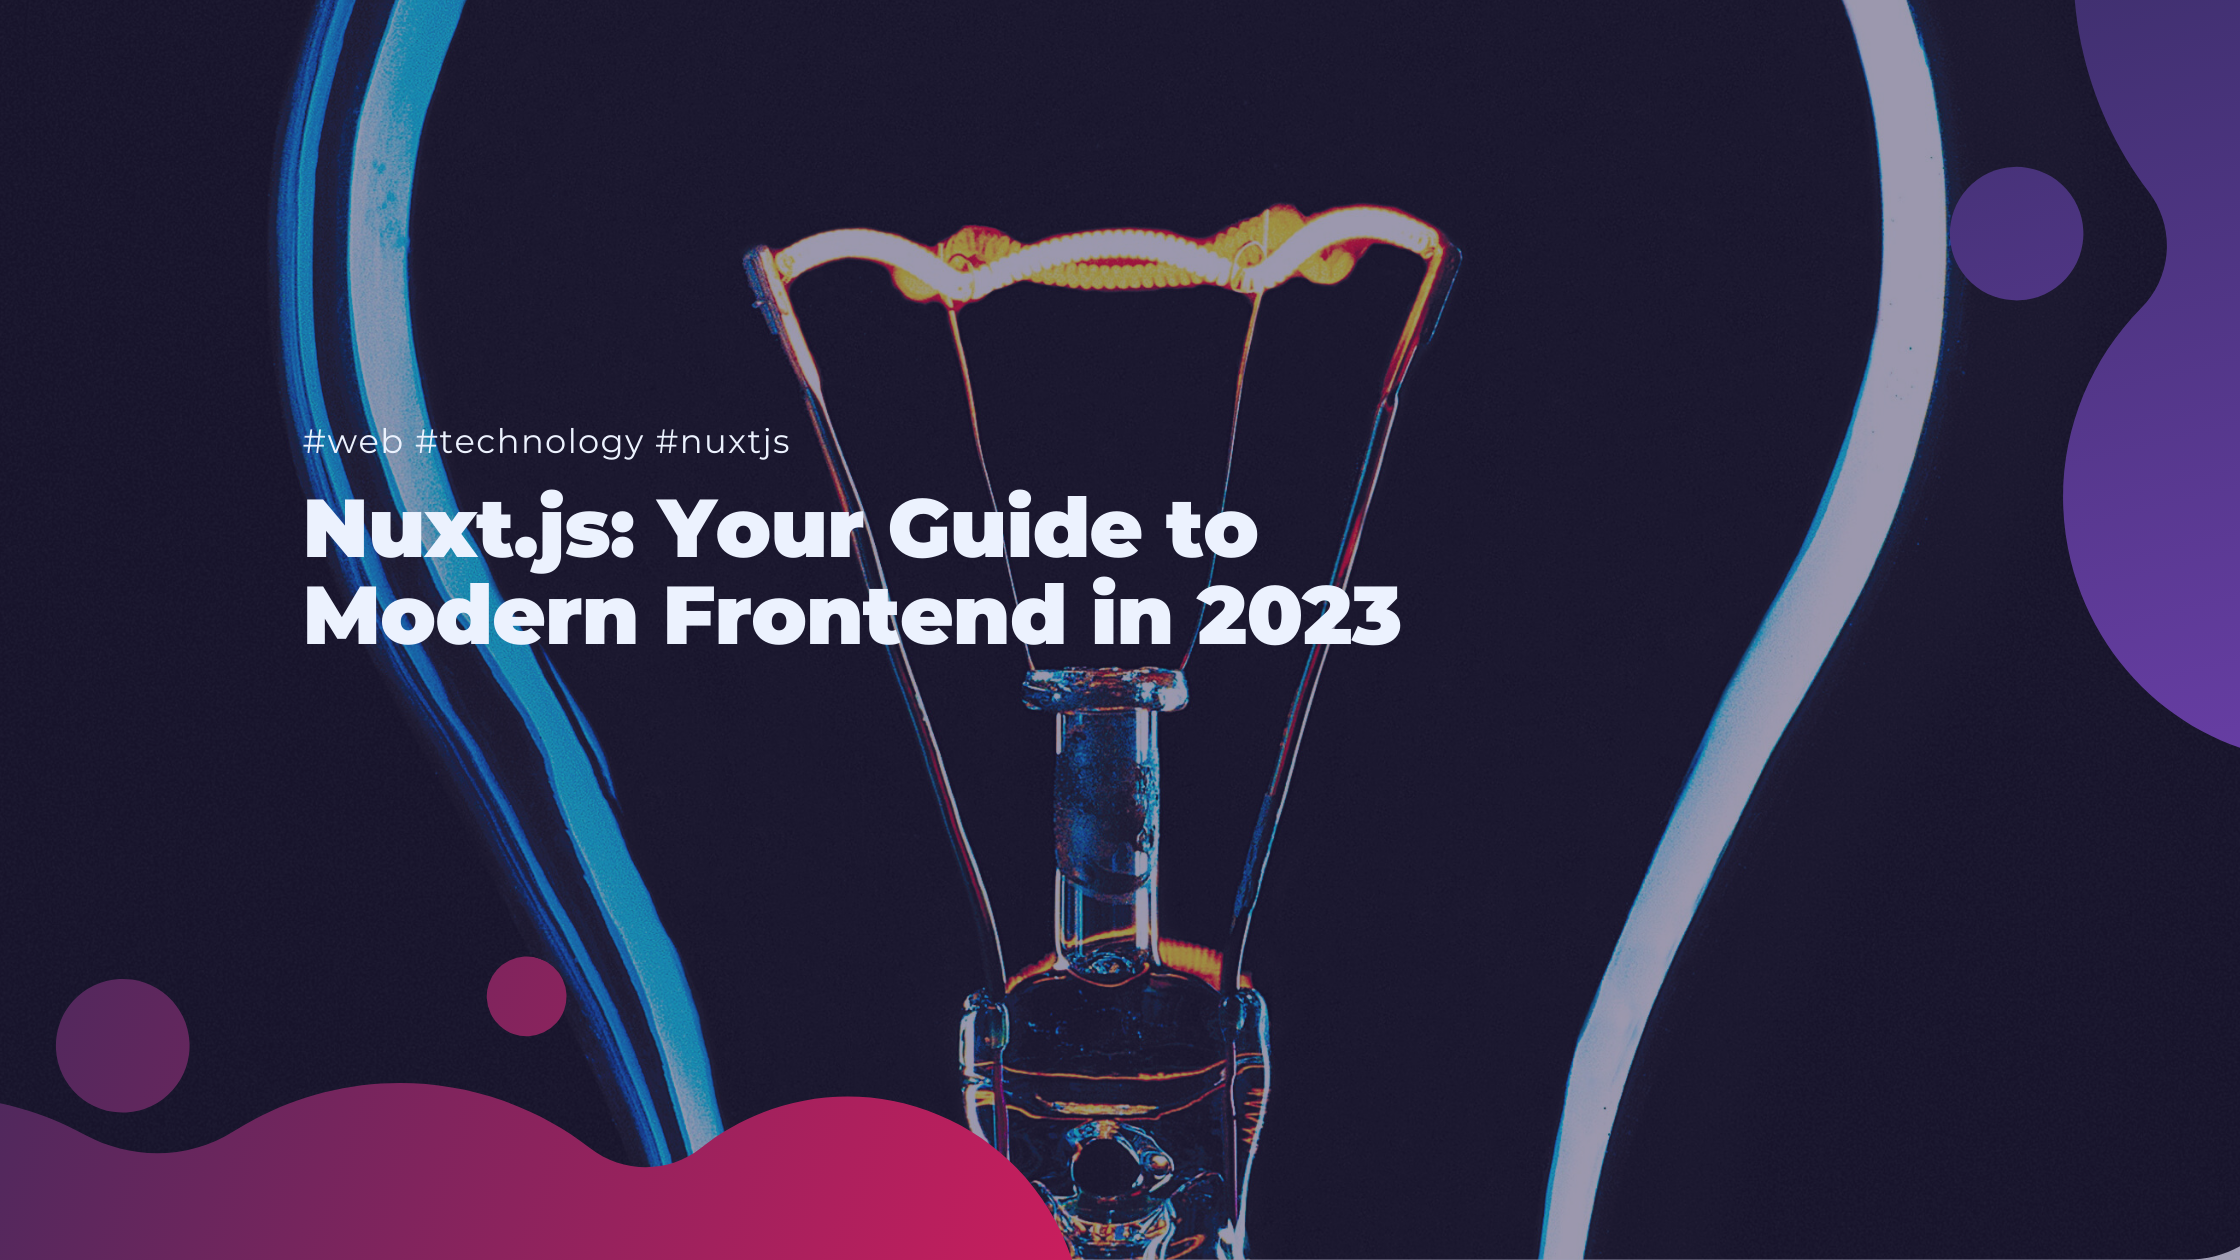 Nuxt.js: Your Guide to Modern Frontend in 2023